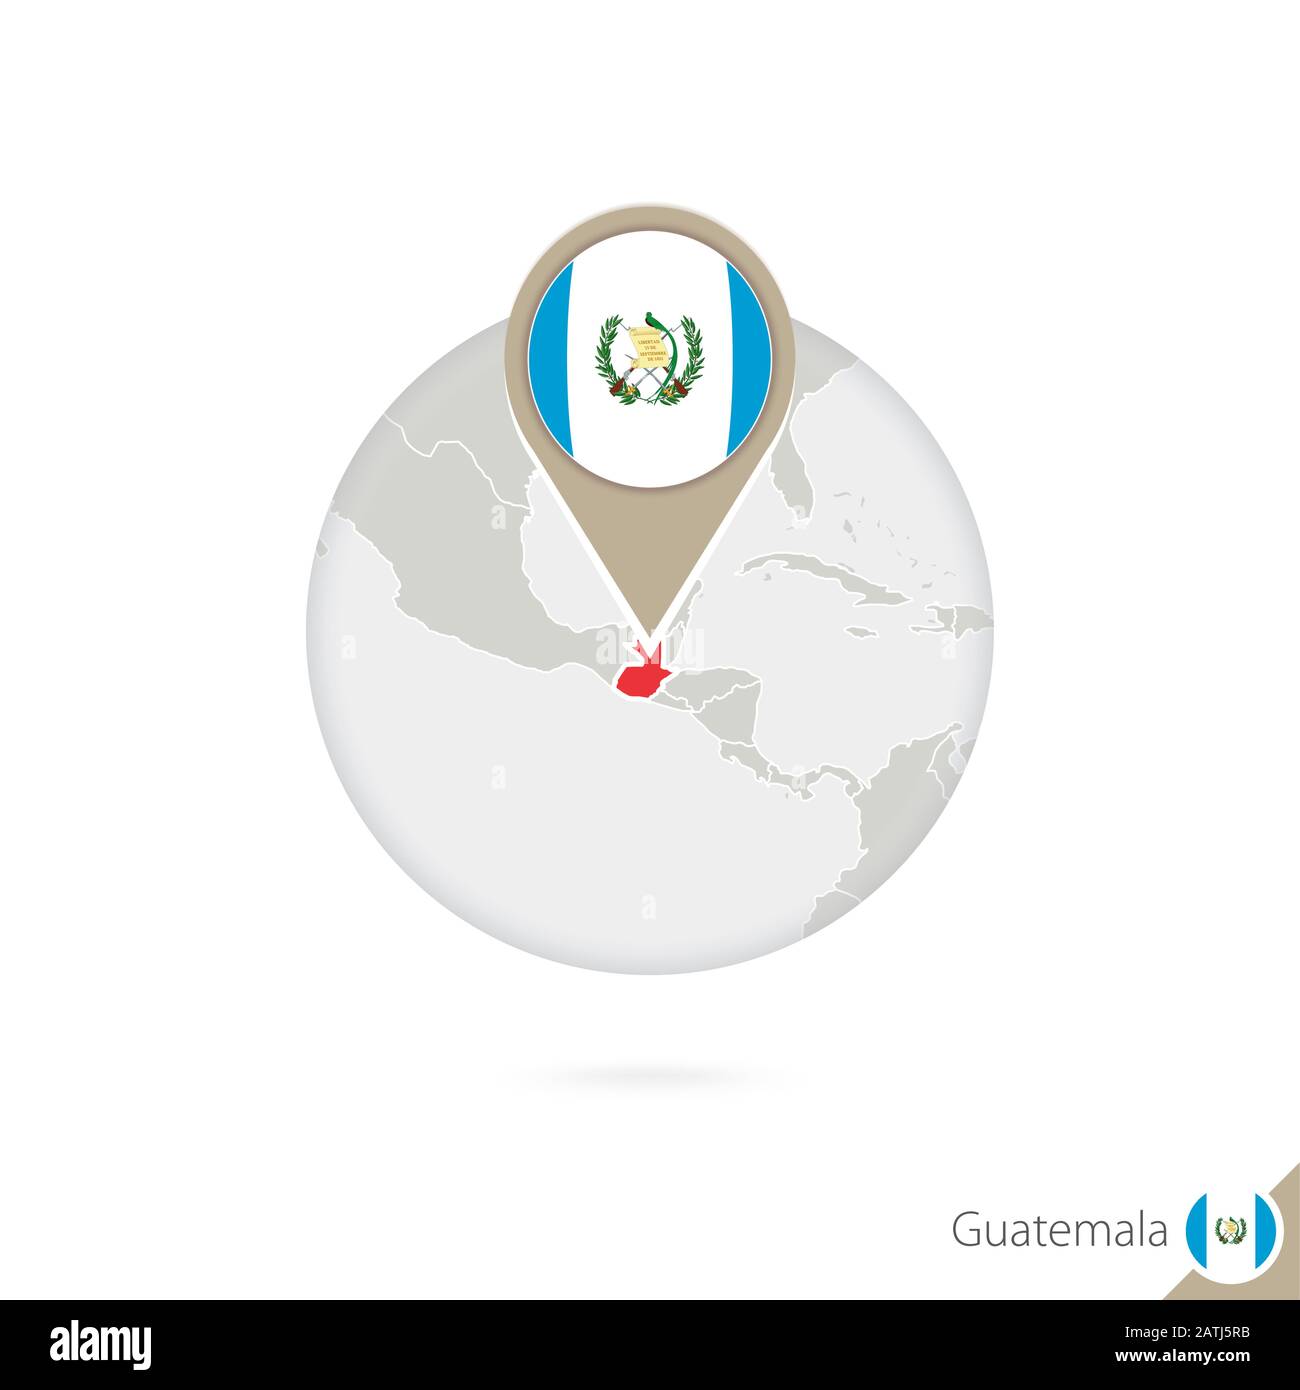 Guatemala map and flag in circle. Map of Guatemala, Guatemala flag pin. Map of Guatemala in the style of the globe. Vector Illustration. Stock Vector